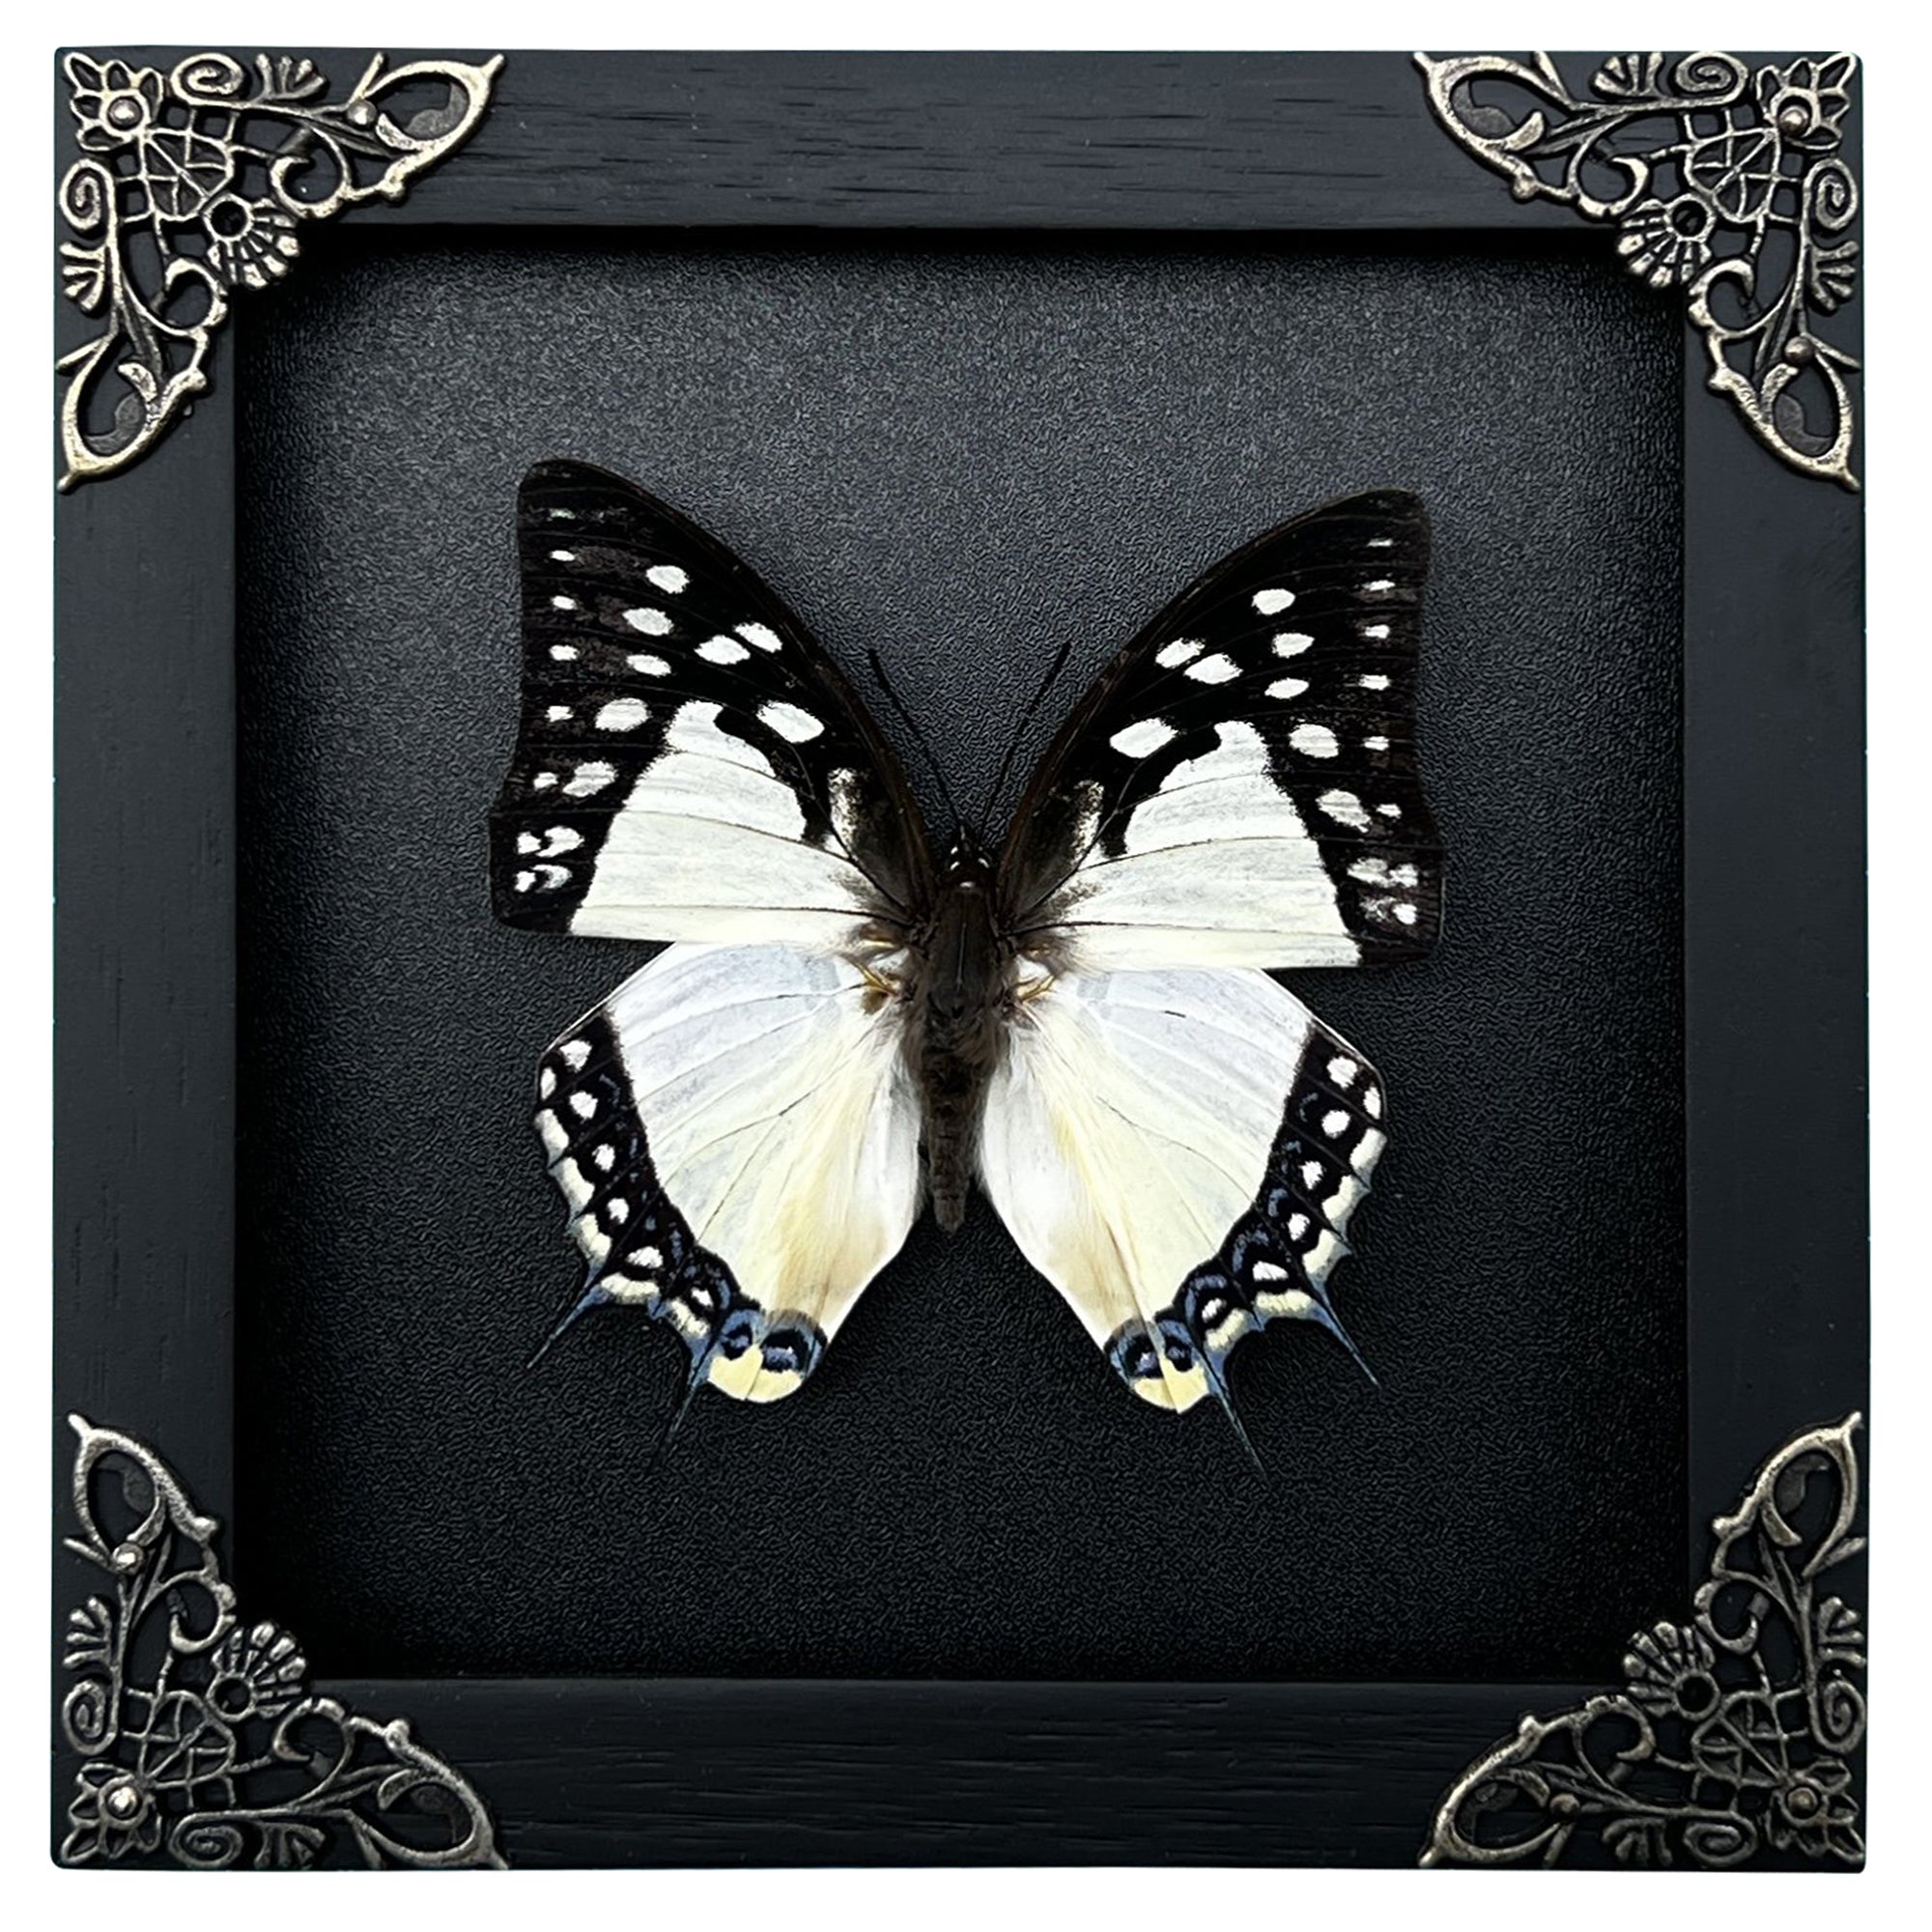 Real Butterfly Polyura Wooden Black Frame Dried Insect Specimens Taxidermy K14-04-DE